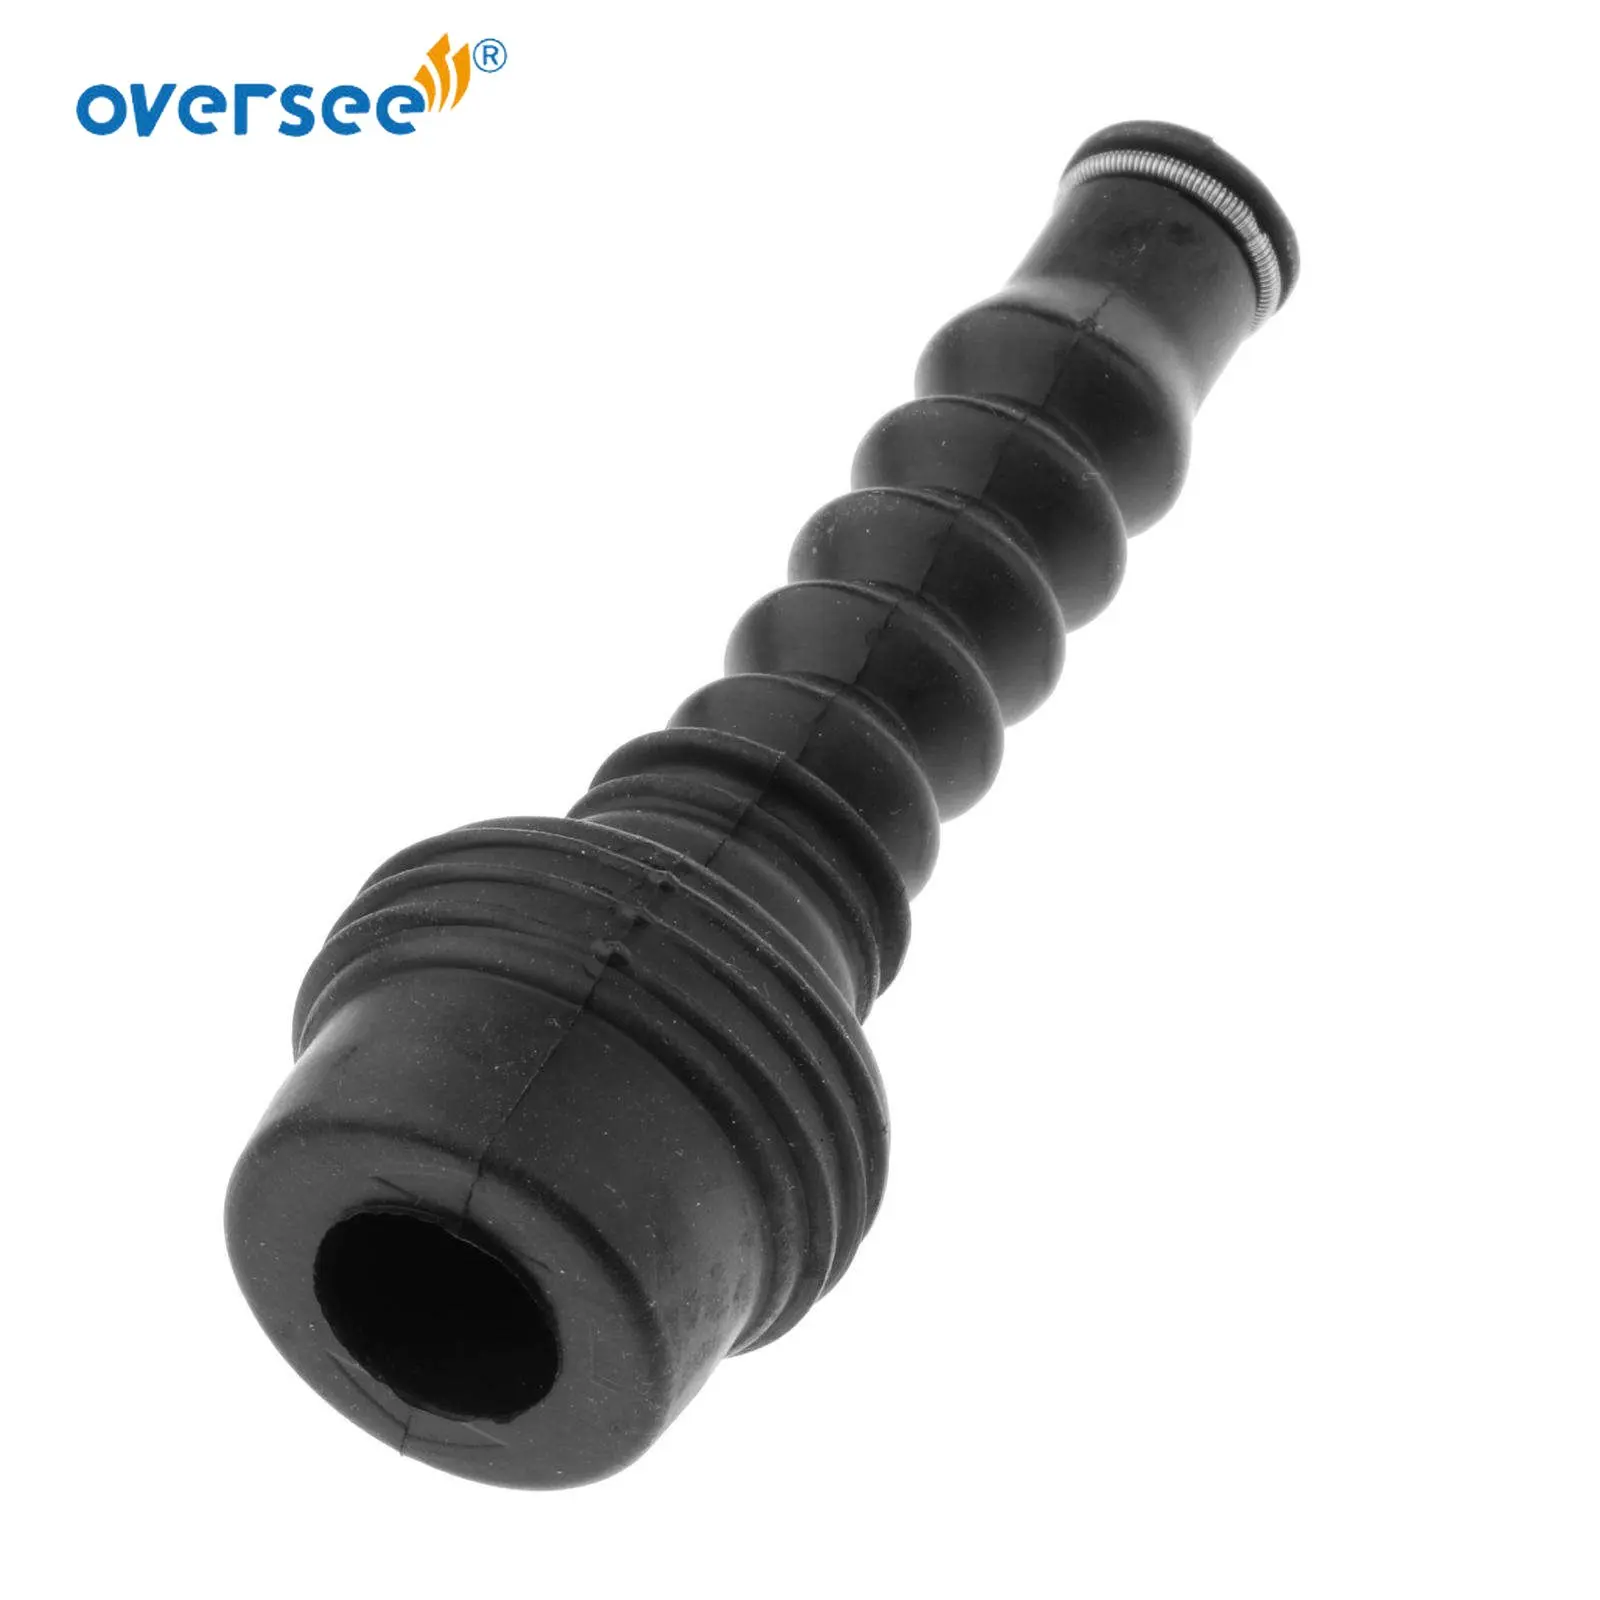 

682-44147 Rubber Boot Shift Rod For Yamaha Outboard Motor 2T 9.9HP 15HP 682 6E7 6B4 Series 682-44147-00